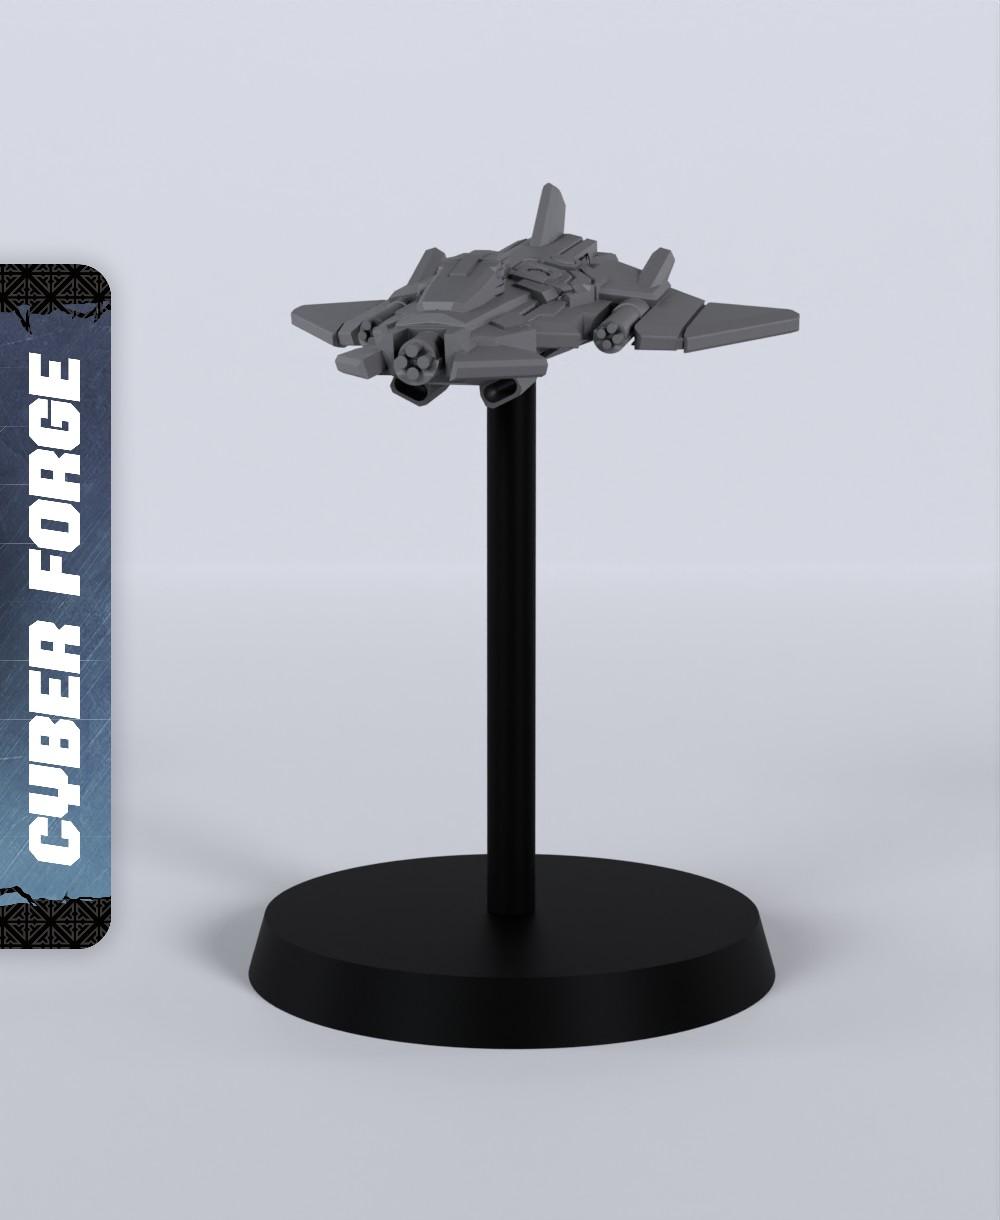 Prowler - With Free Cyberpunk Warhammer - 40k Sci-Fi Gift Ideas for RPG and Wargamers 3d model